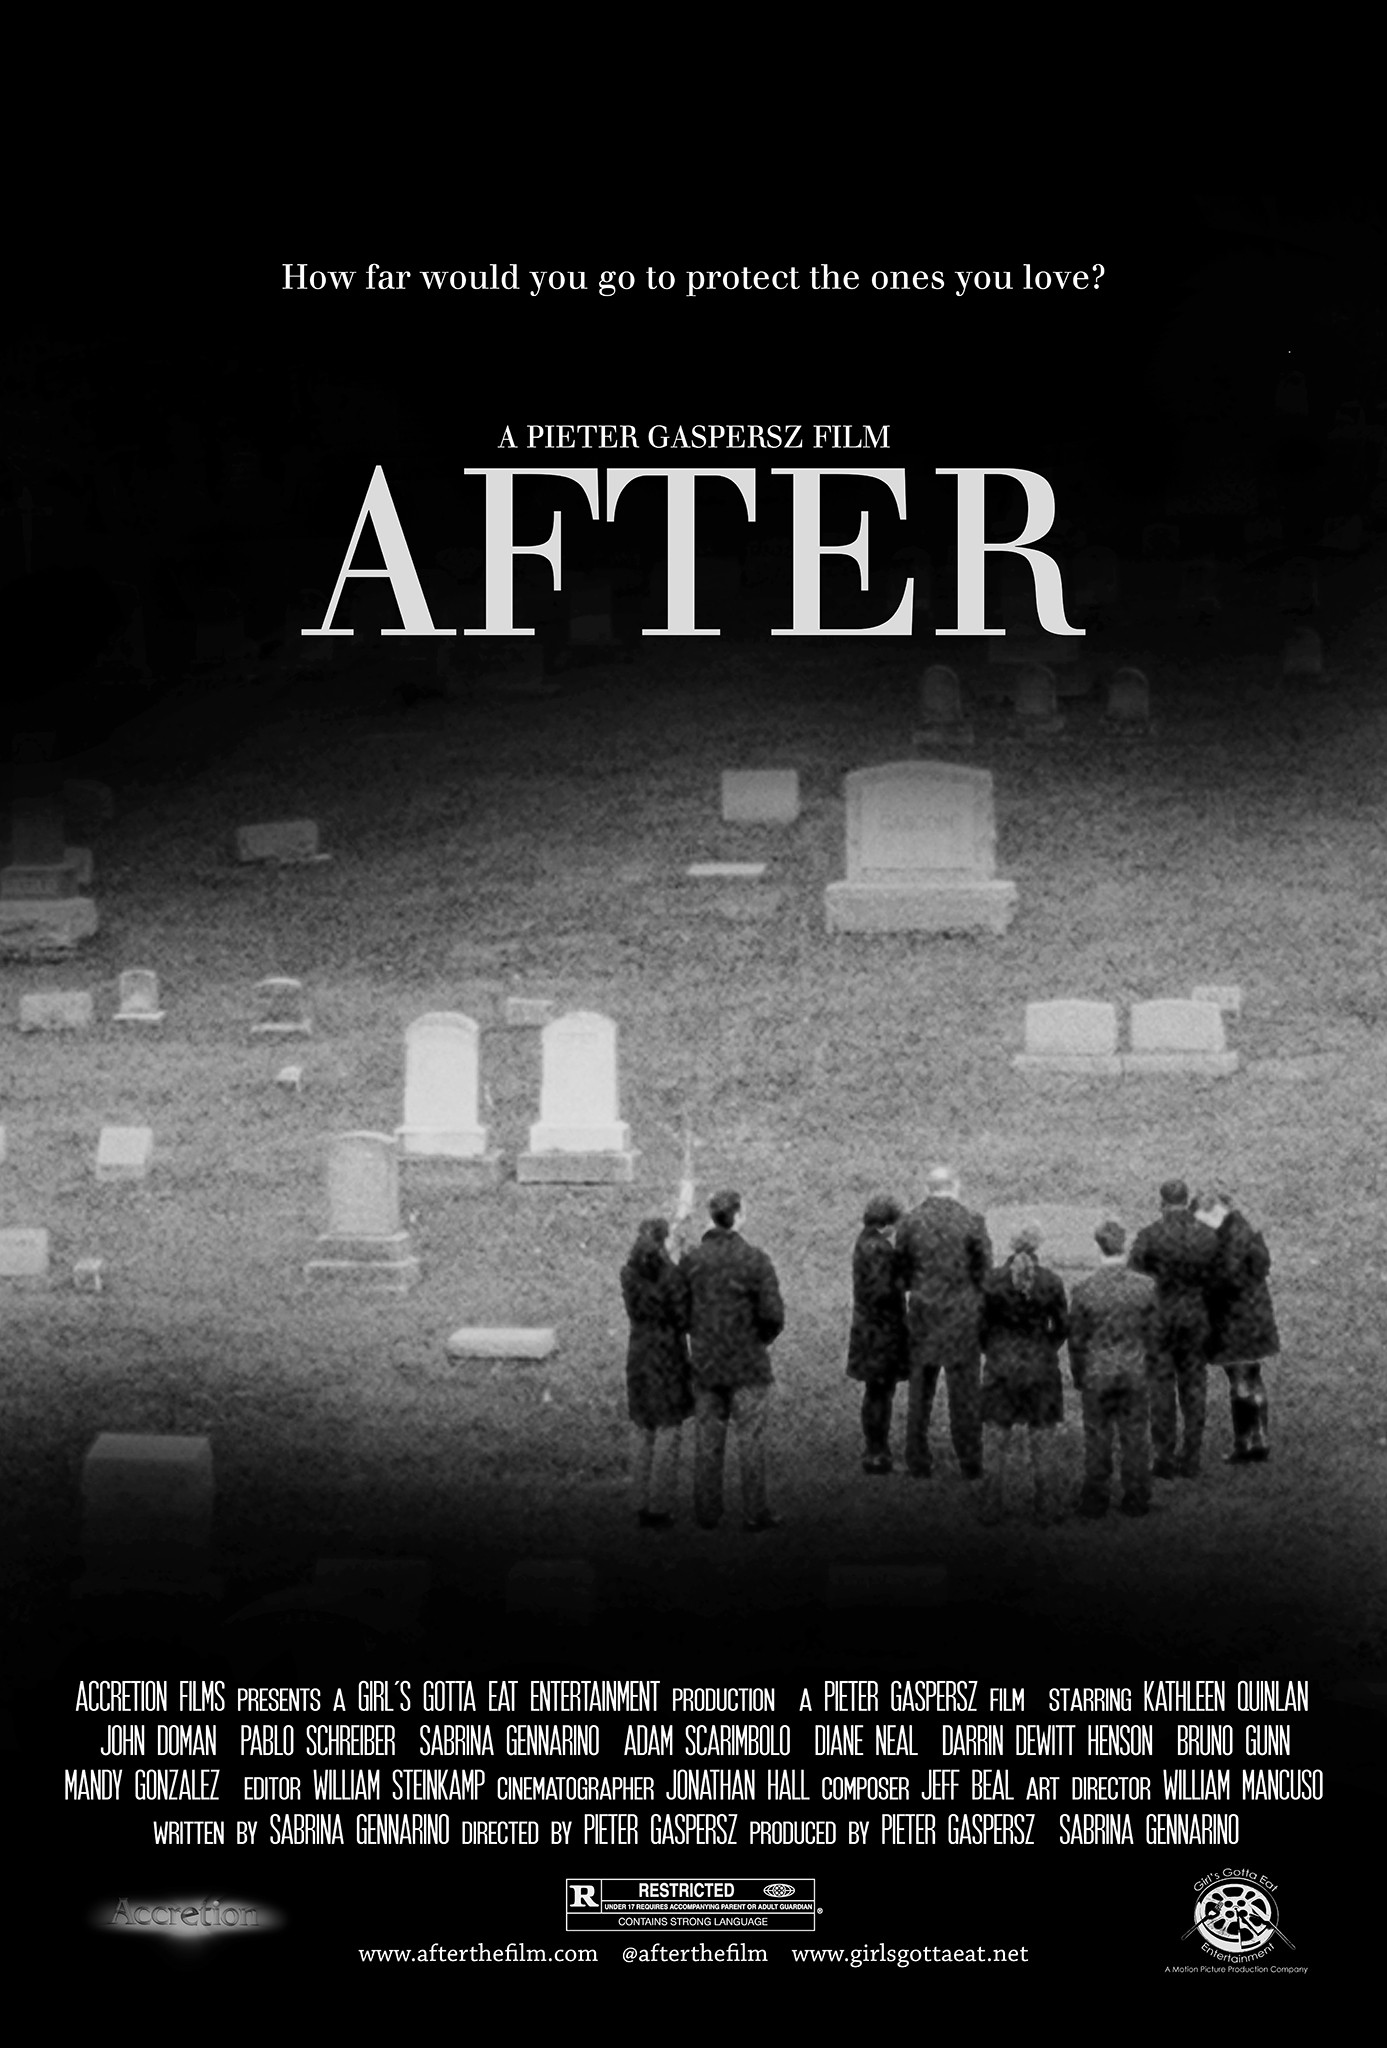 Mega Sized Movie Poster Image for After 